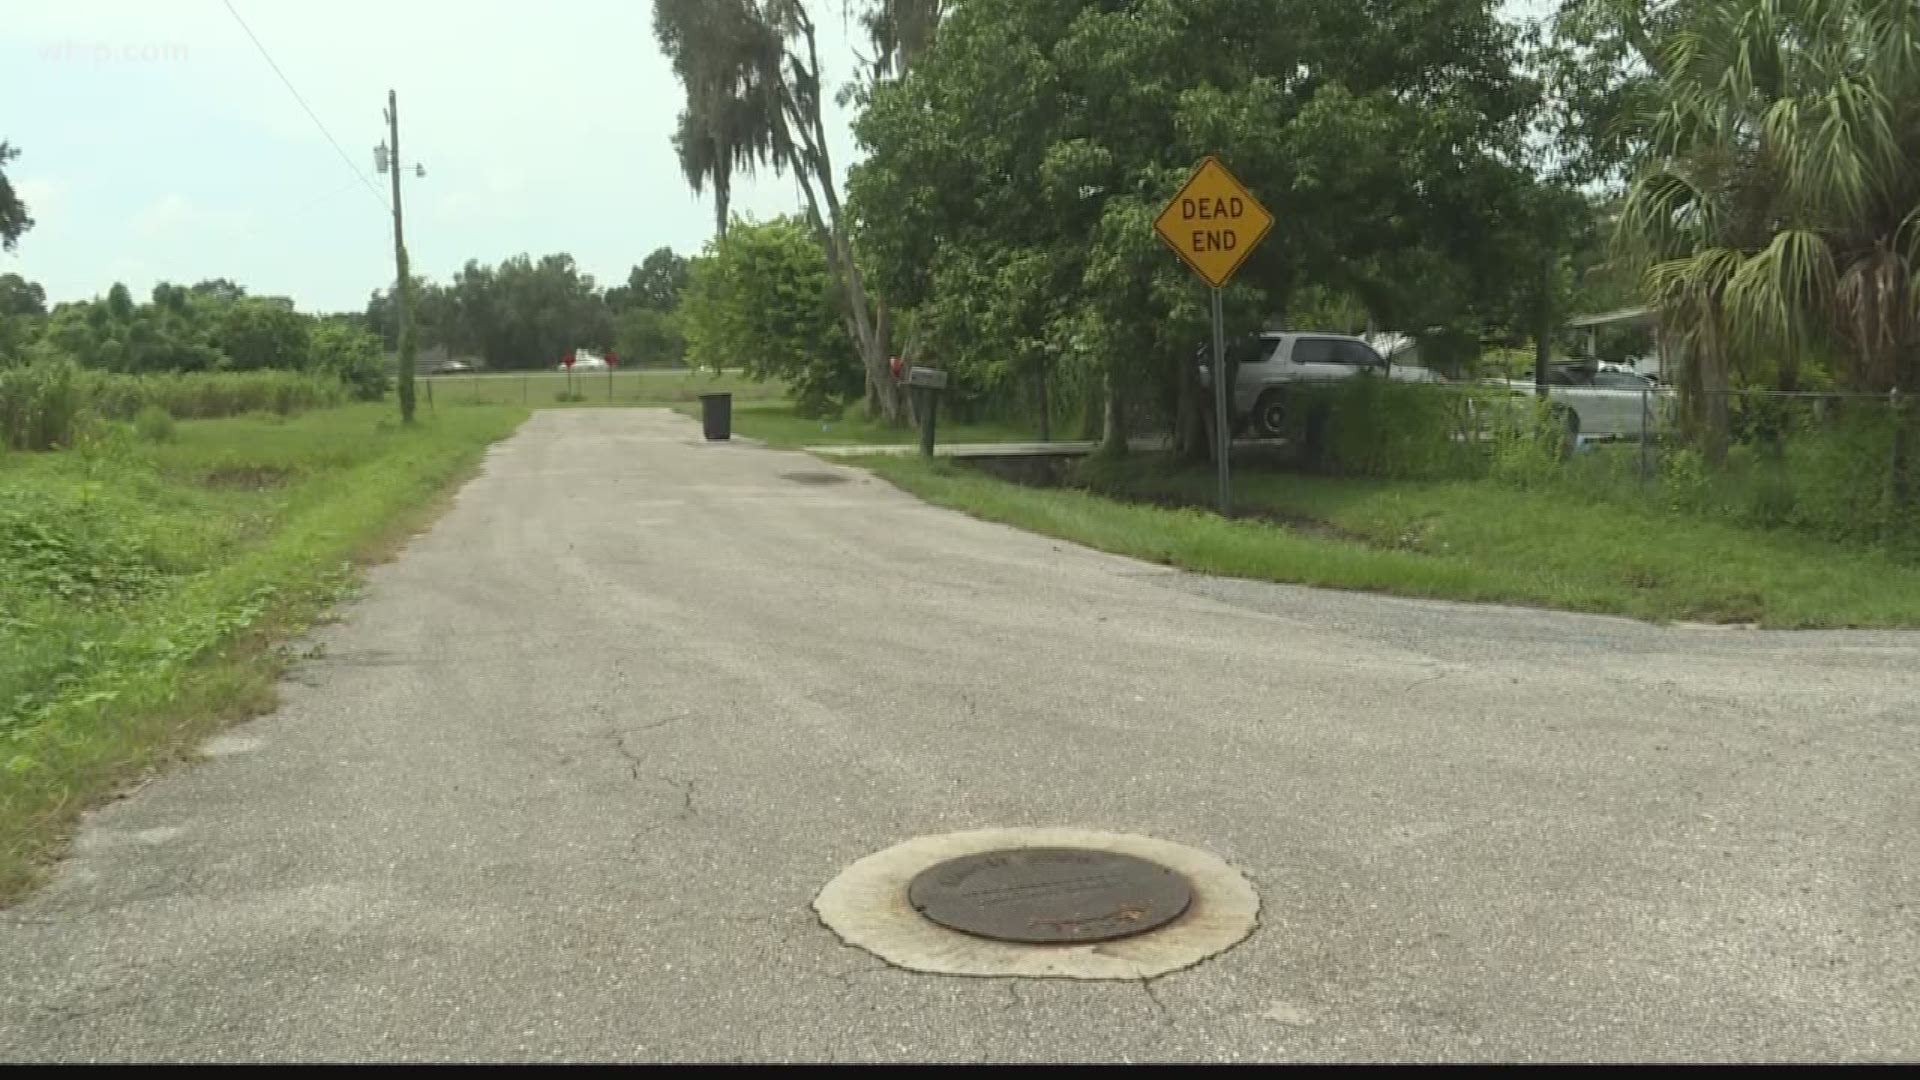 Heavy rain overwhelmed the sewer system in Sarasota this weekend. In all, 26 million gallons of reclaimed water has been discharged from a storage pond at the Bee Ridge Water Reclamation Facility. It holds about 170 million gallons, but it’s overflowing.